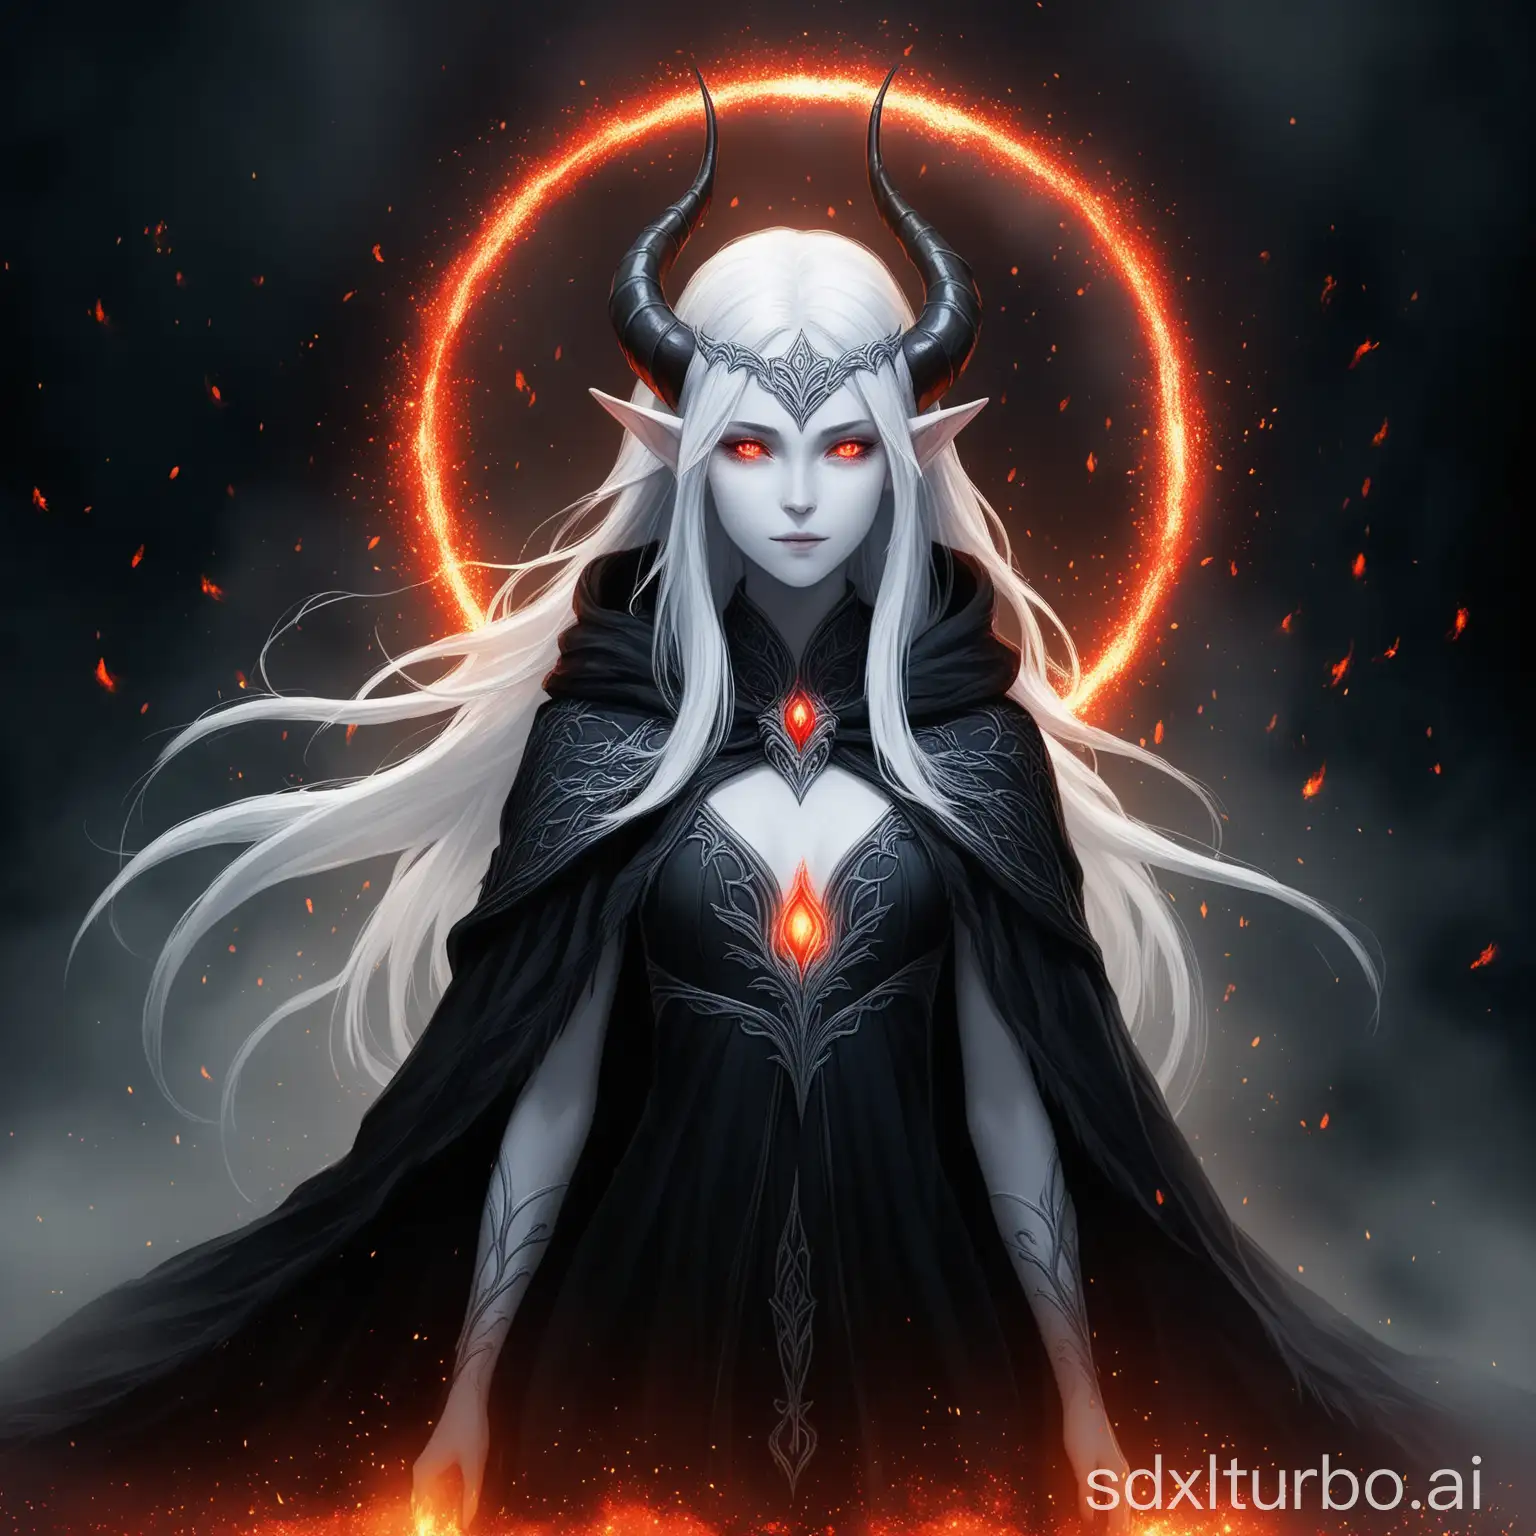 Create a dark, mystical elven character with white hair, a black horn, and pale skin. Dress her in a feathered cloak, transitioning from white to dark. Add a glowing red halo behind her head and floating embers around her in a misty, dark background.